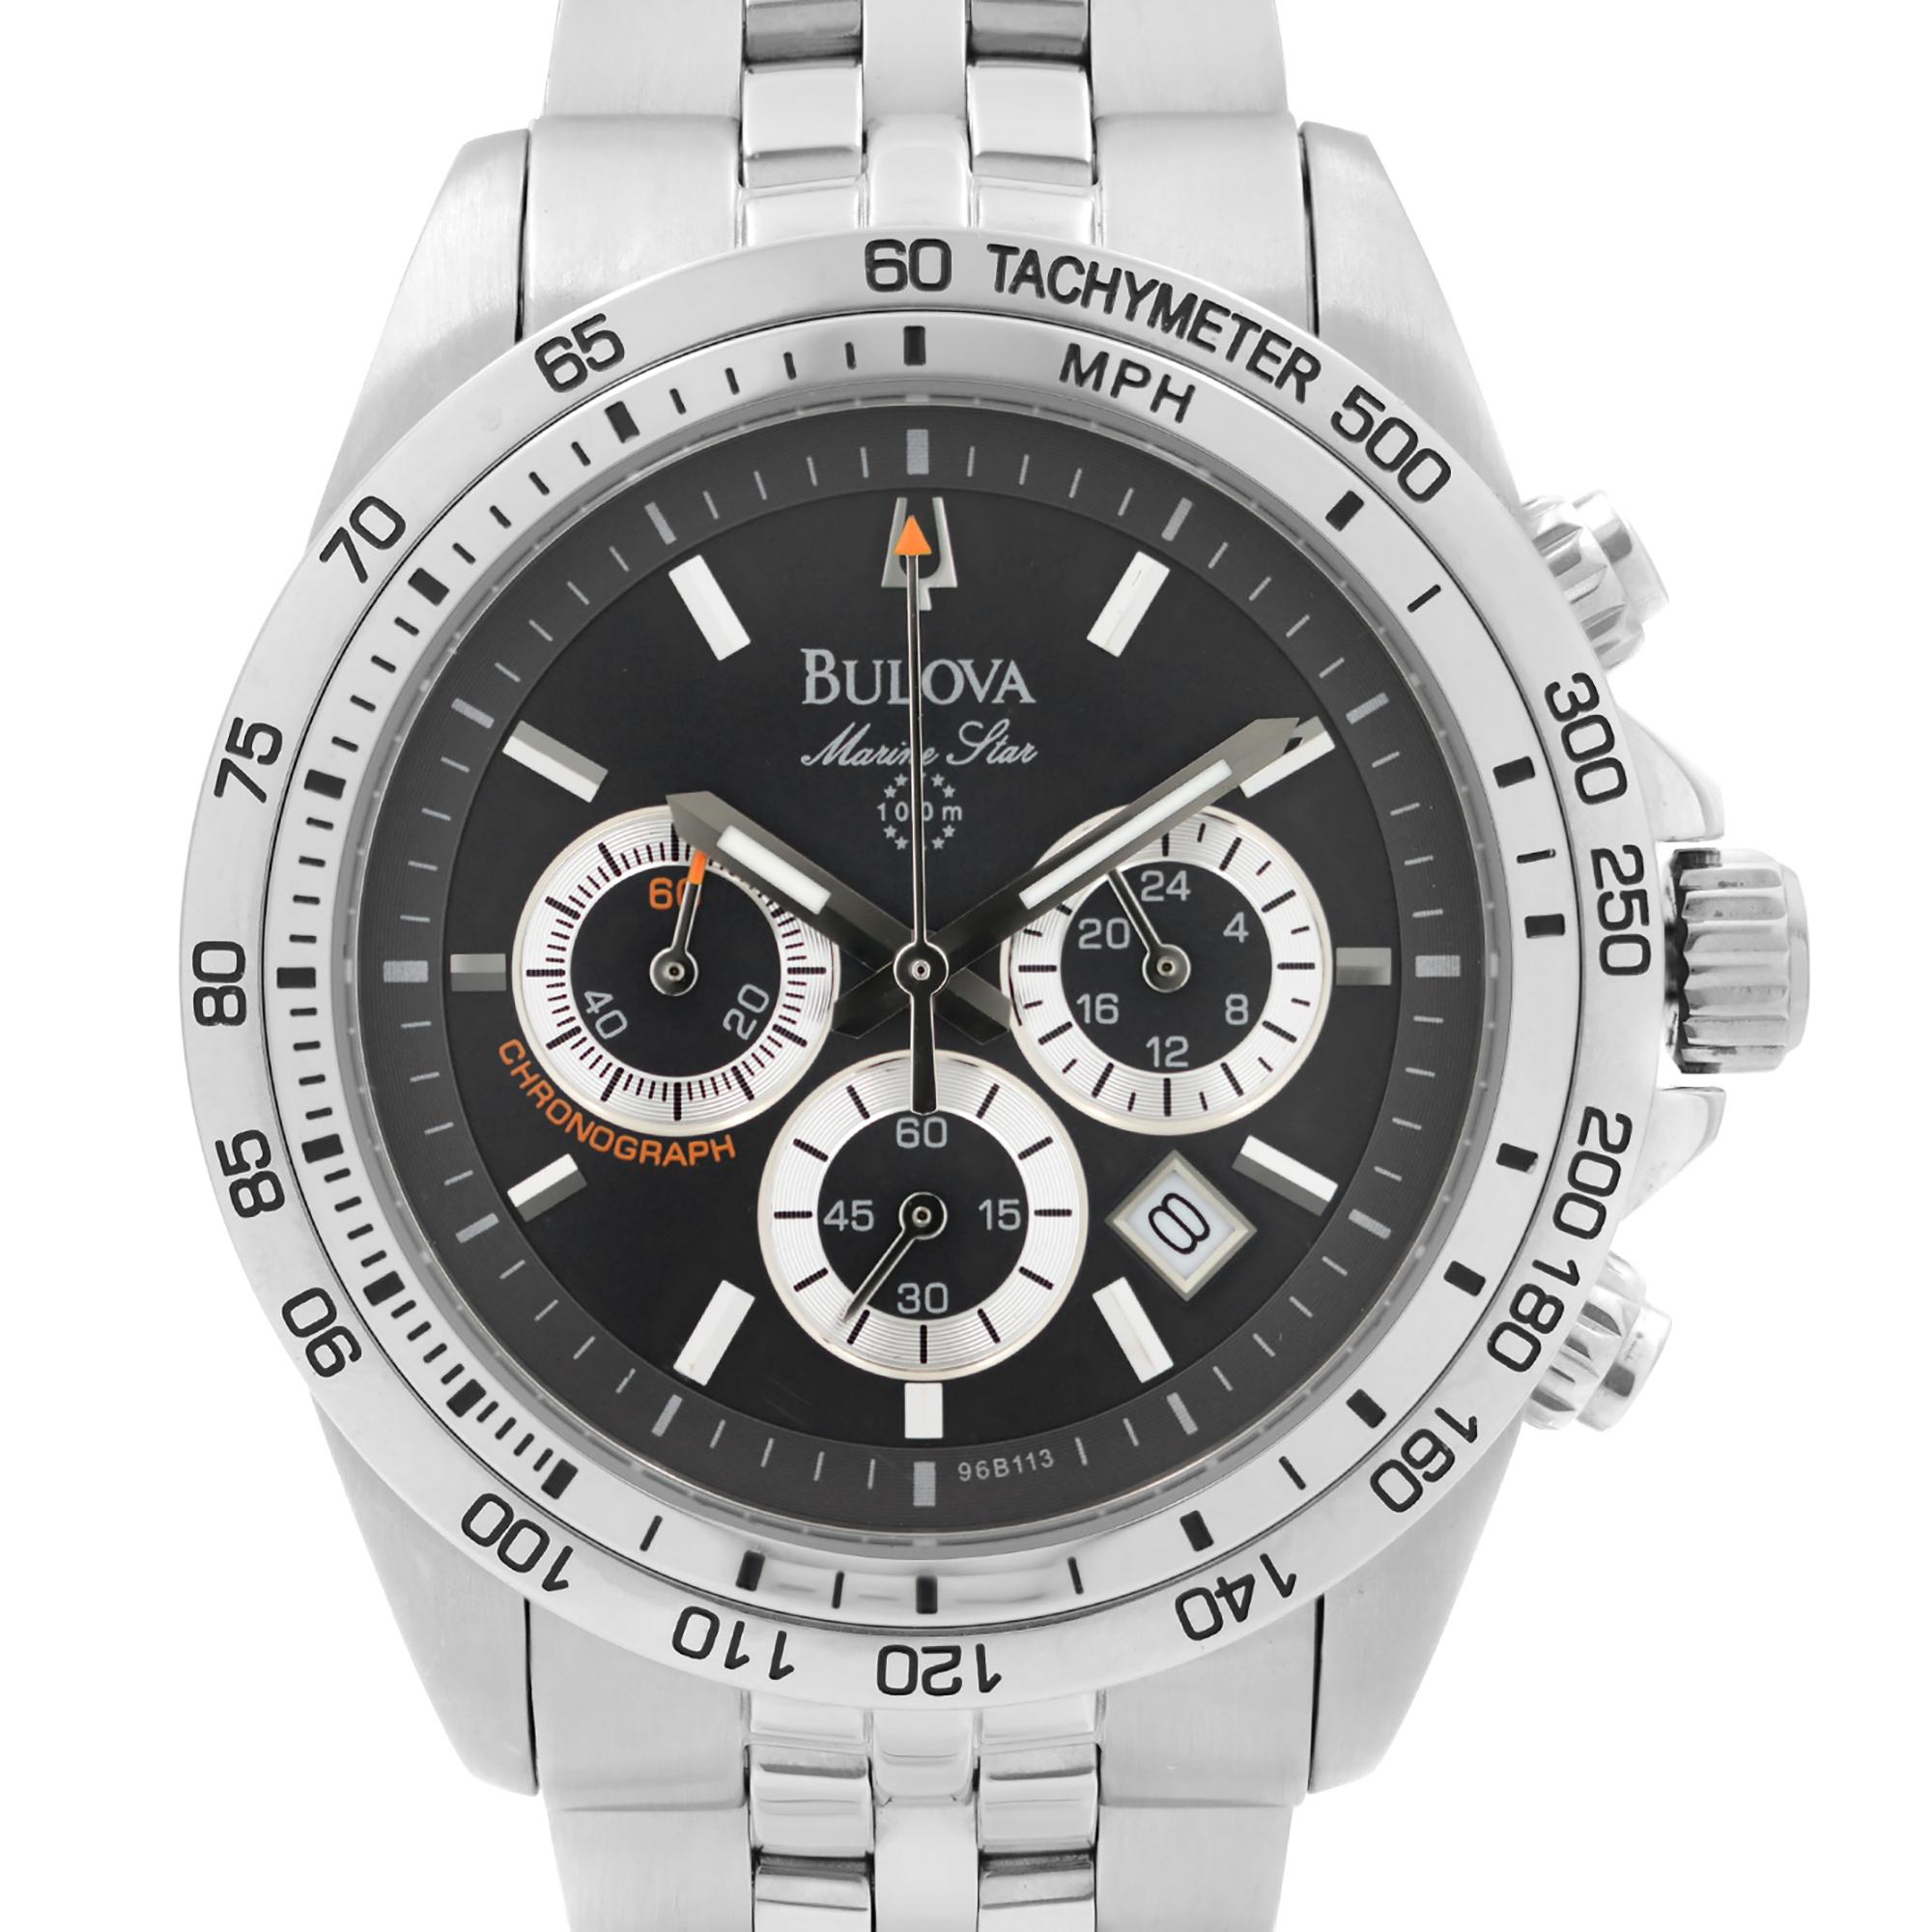 New with Defects Bulova Marine Star Men's Watch 96B113. The Watch has a few Tiny Scratches in the Crystal and has Missing Links. Fits 7.25 inches Wrist Size. This Beautiful Timepiece is Powered by Quartz (Battery) Movement And Features: Stainless